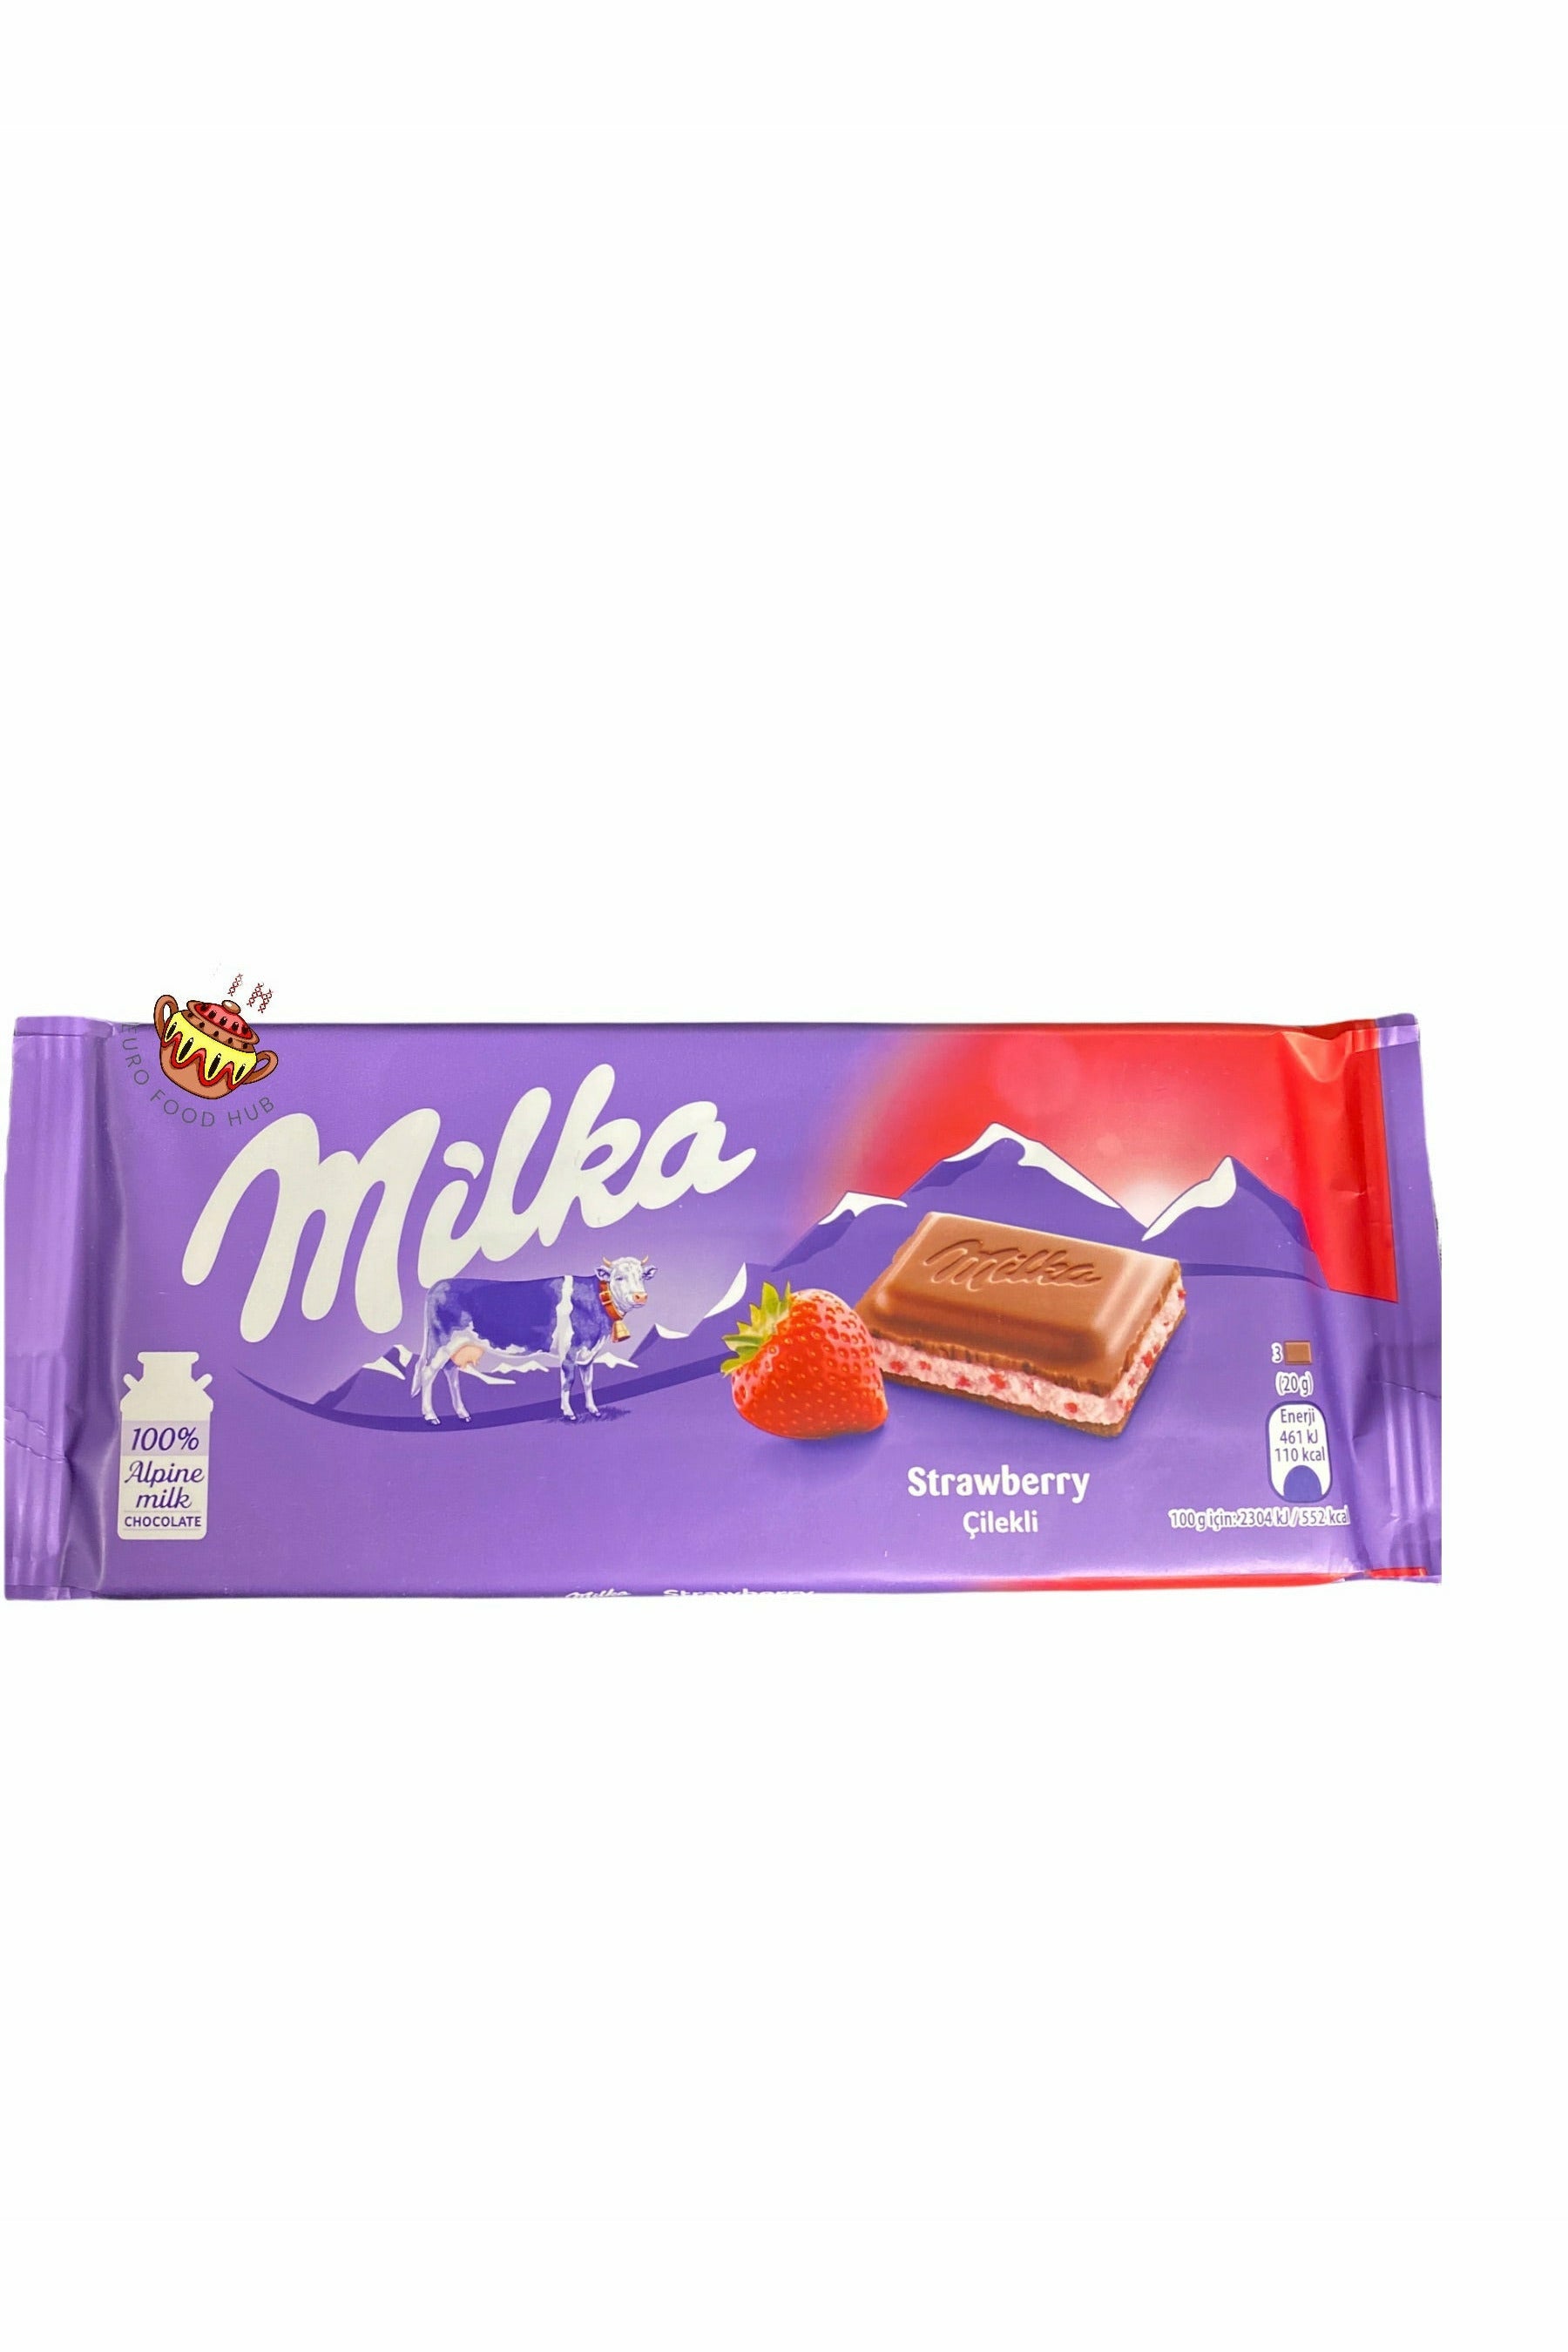 Milka milk chocolate bar delivery to your home